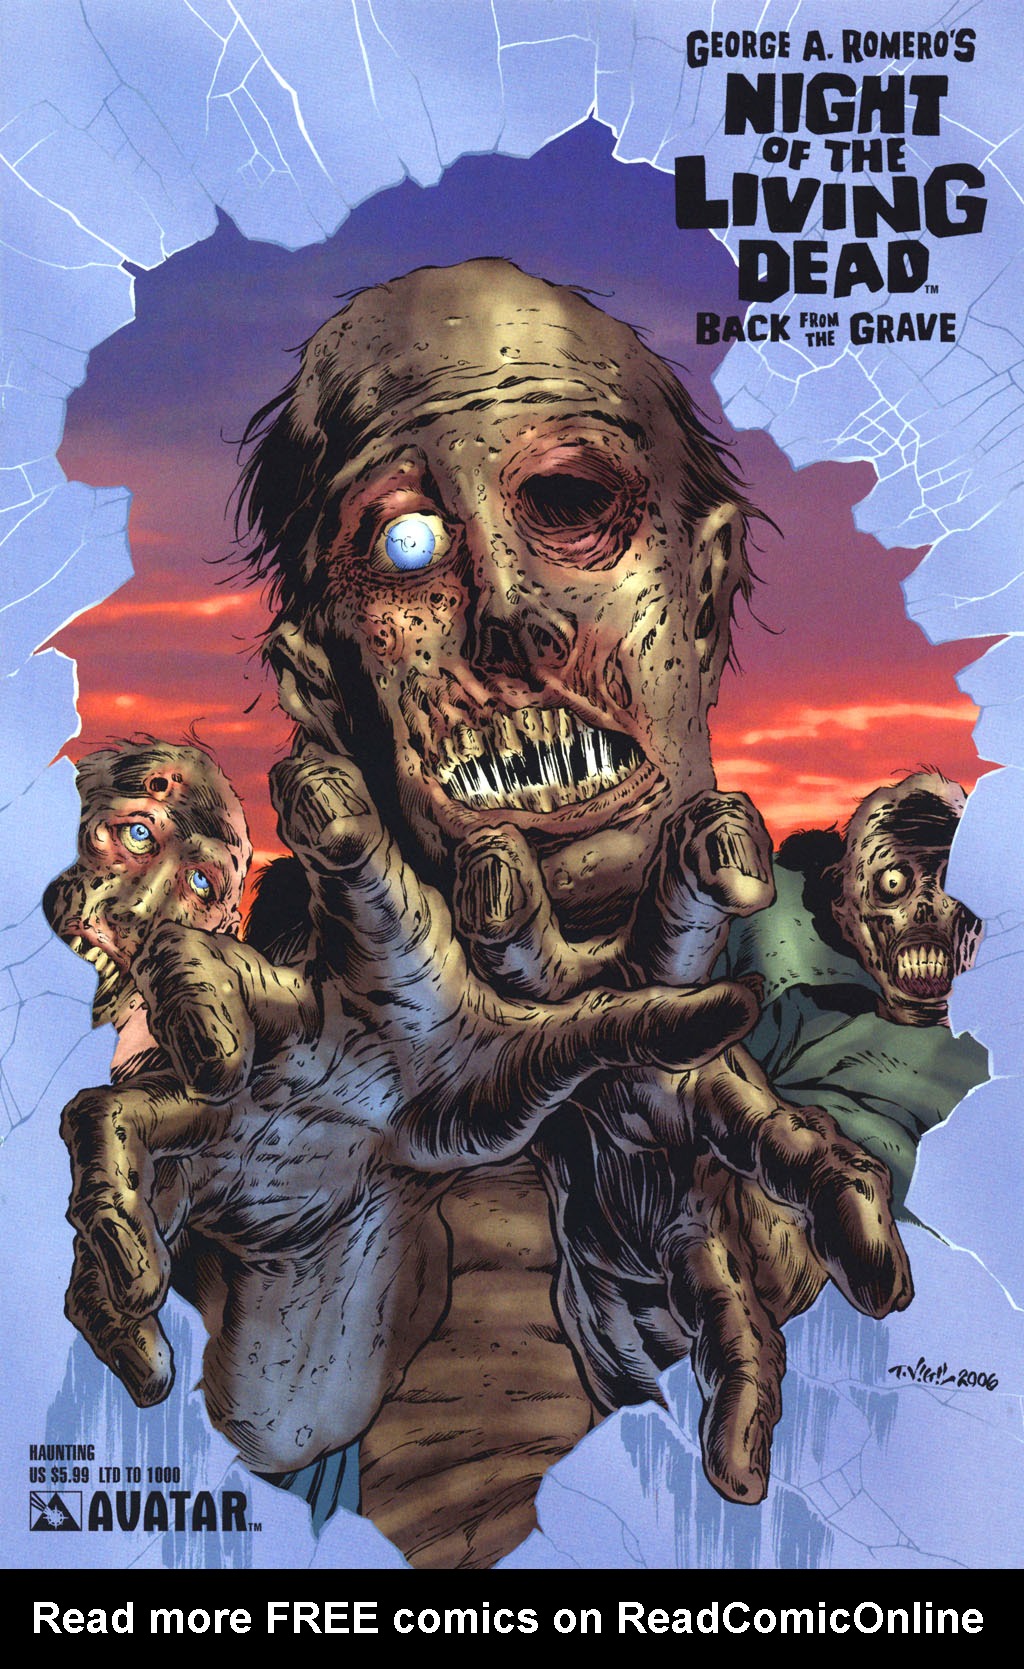 Read online Night of the Living Dead: Back from the Grave comic -  Issue # Full - 5